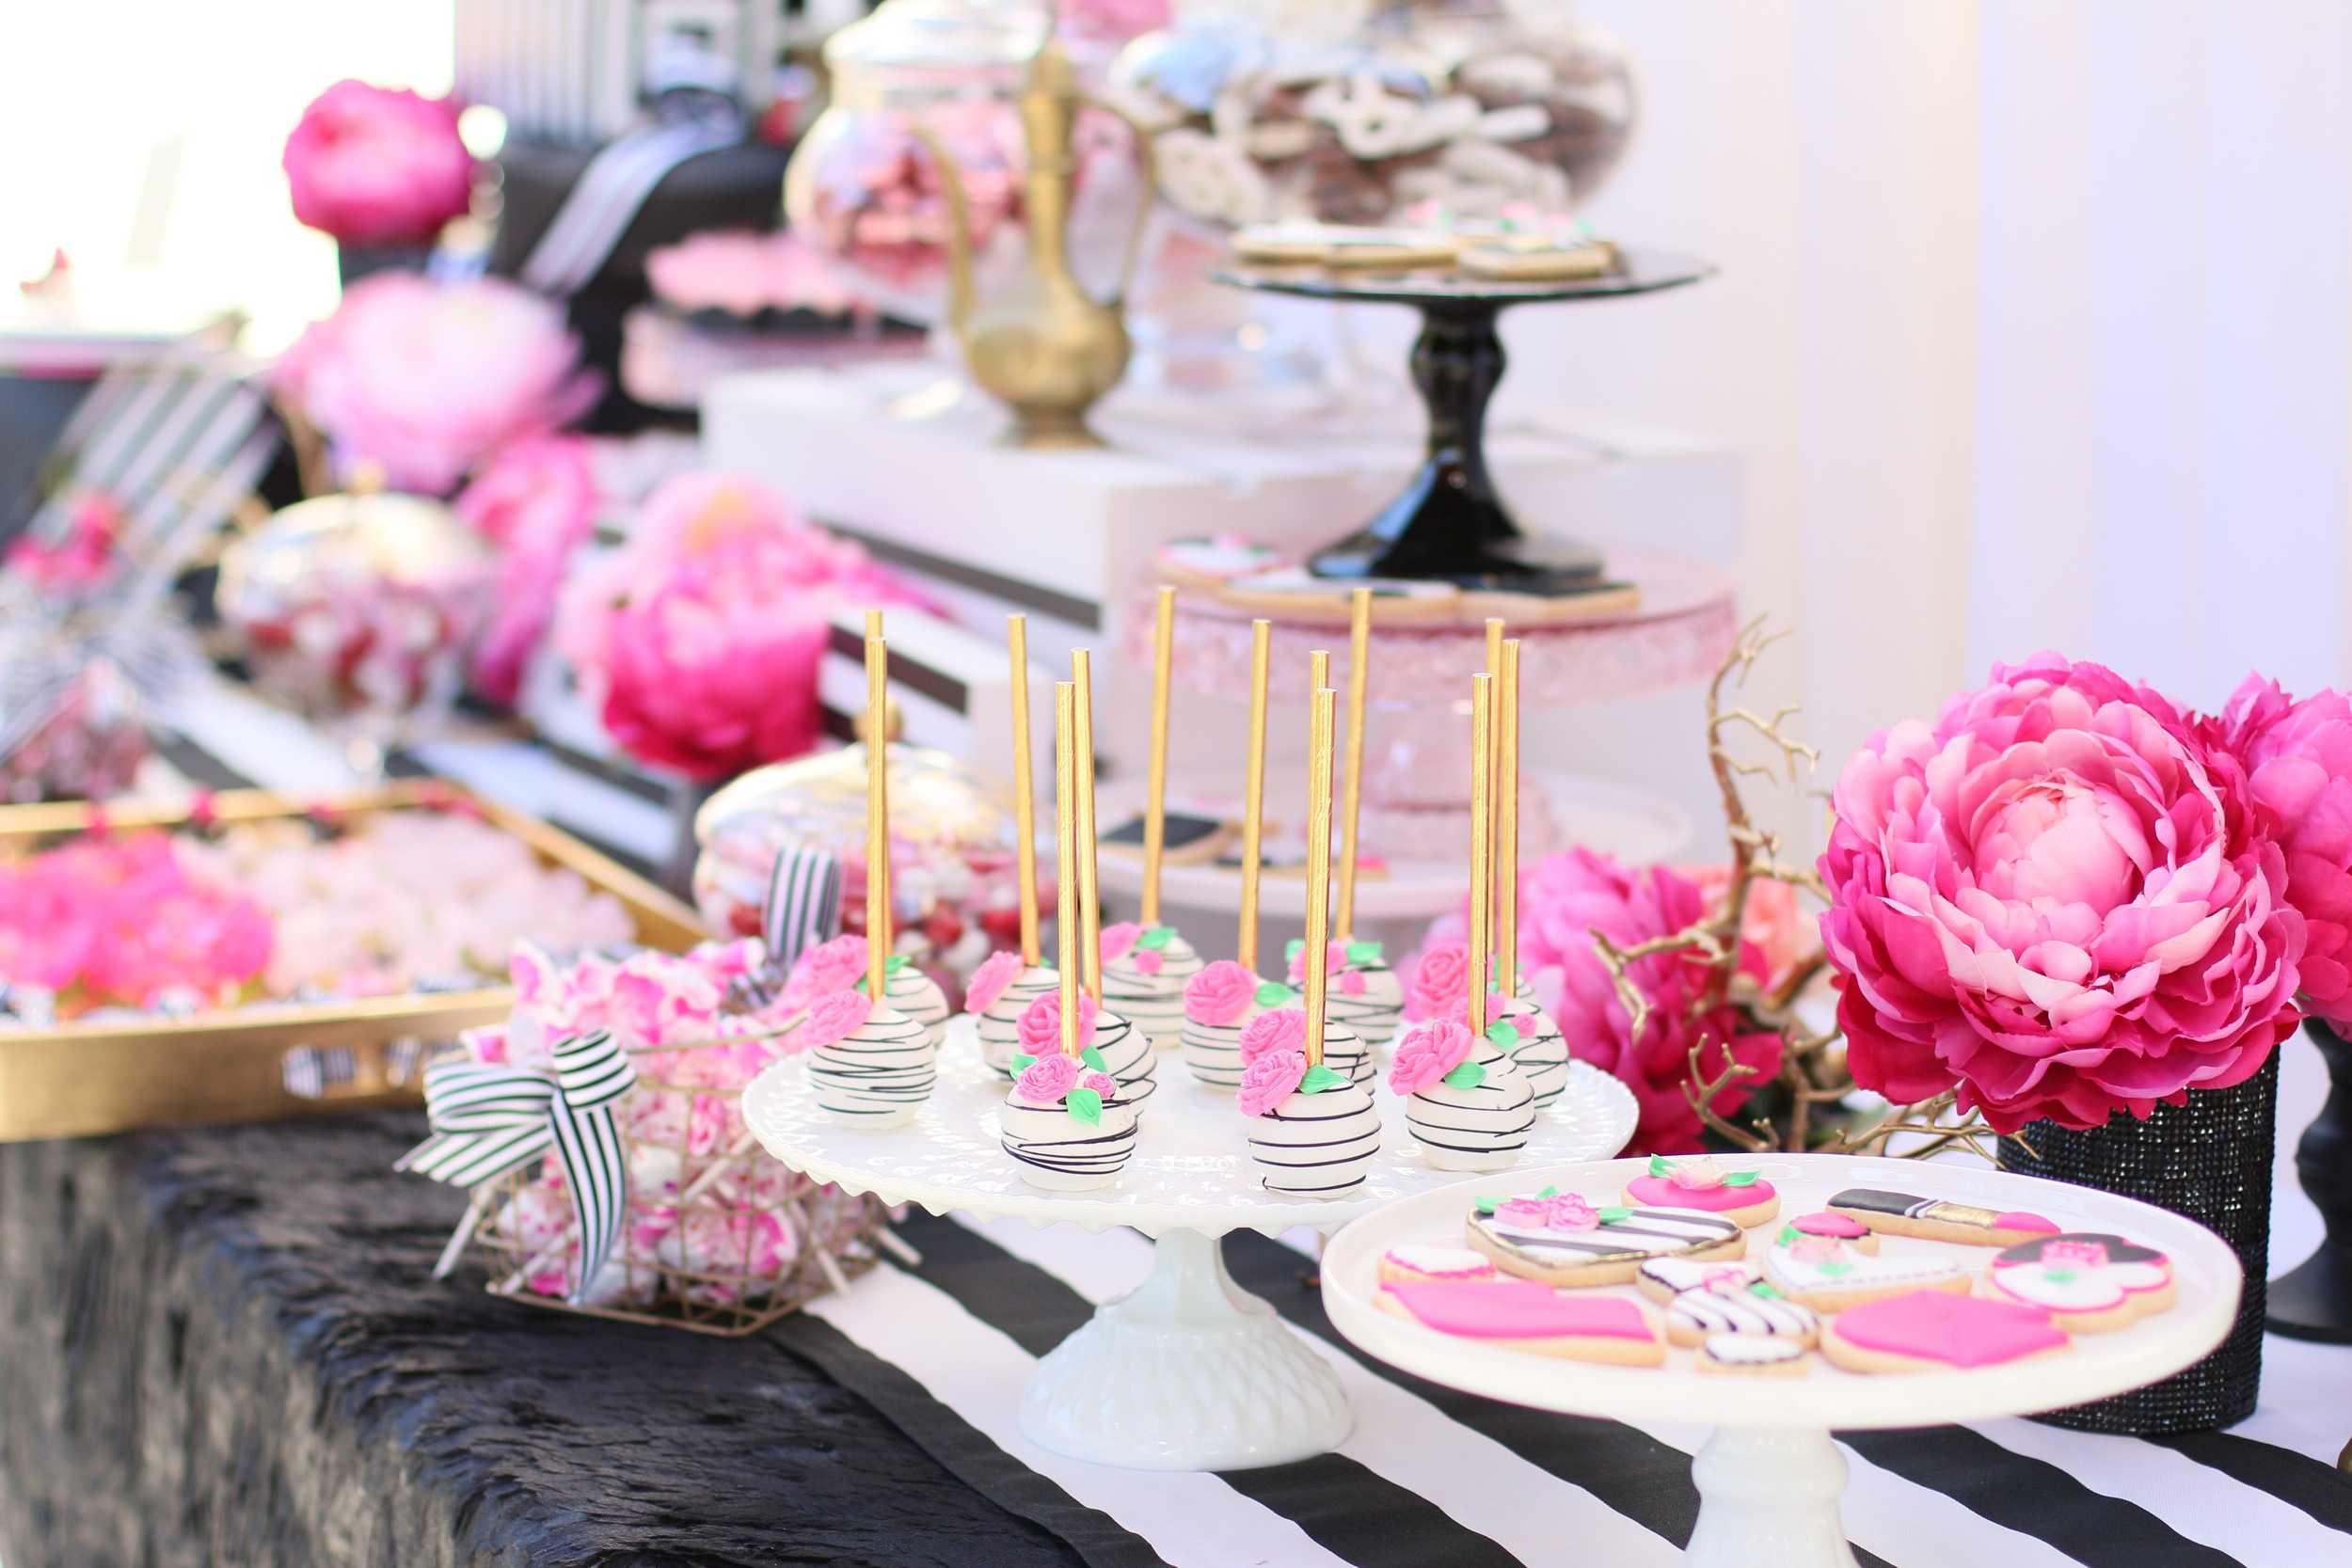 Copy of You'll want to find a reason to celebrate with our "Pink Please" Rental Collection! Everything here is prepackaged to rent! Black & White Stripes + Pink Peonies + gold accents = LOVE! @inJO...